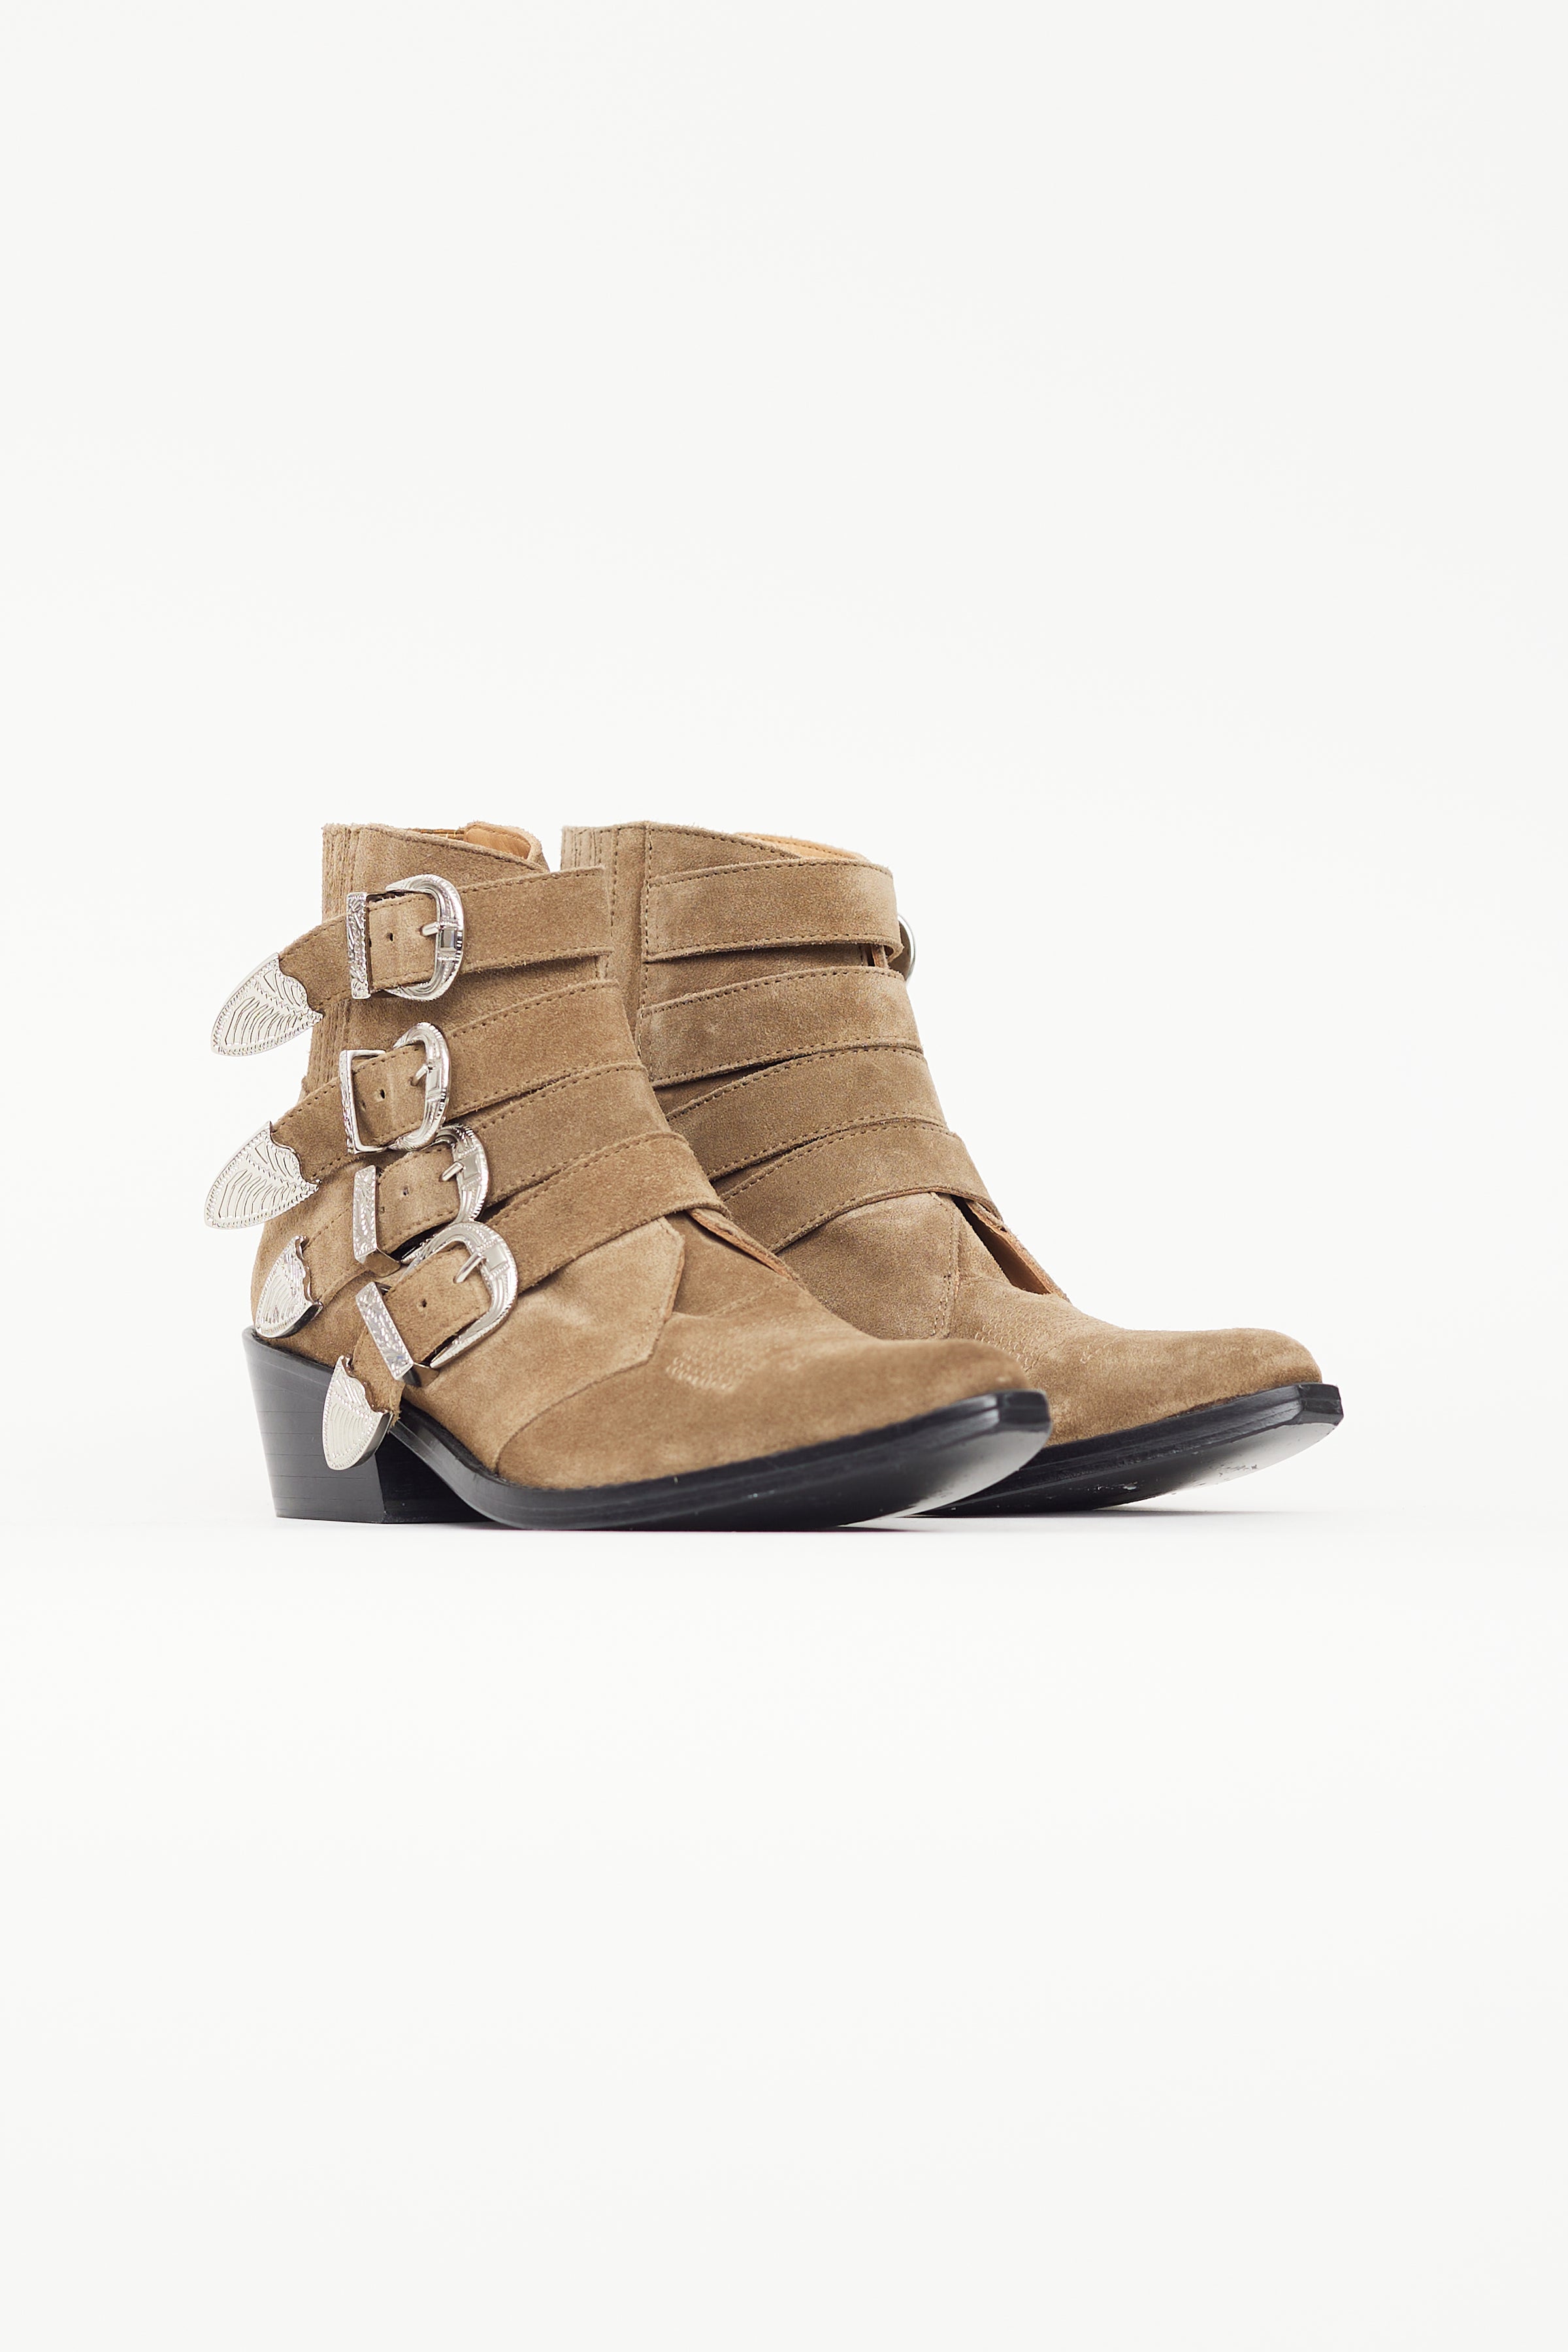 Toga Pulla // Beige Suede Buckled Ankle Boot – VSP Consignment